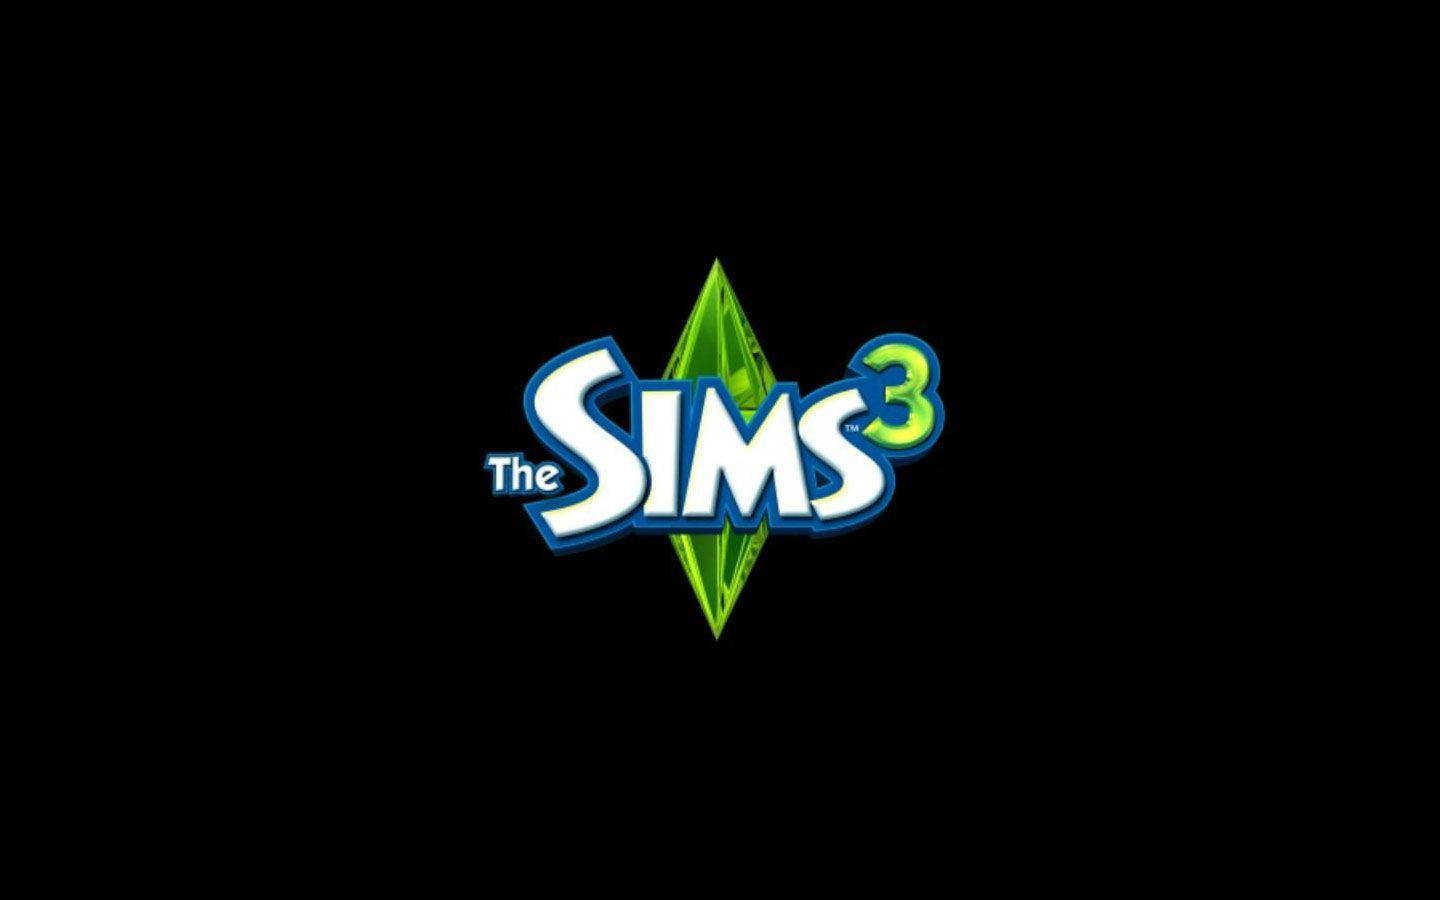 The Sims On Black Wallpaper